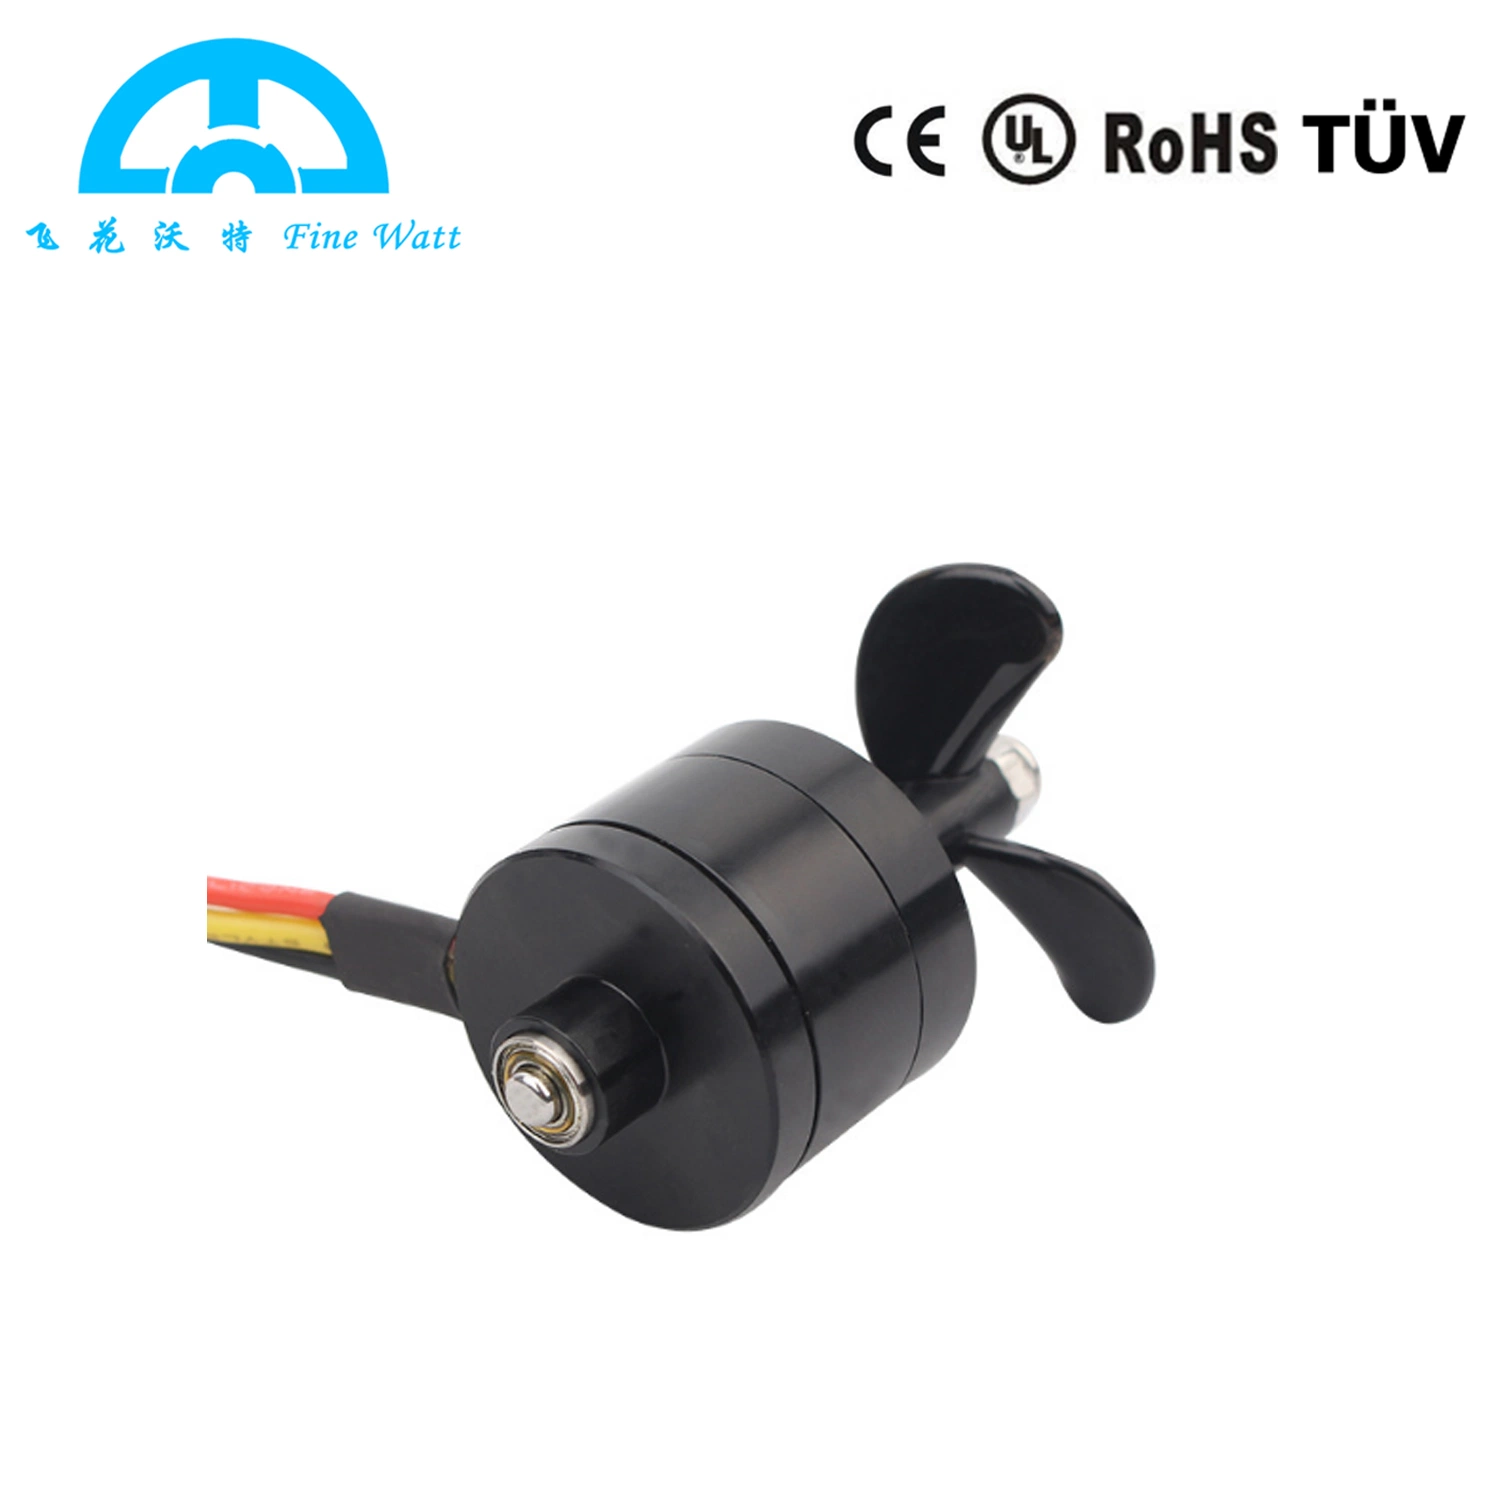 Brushless DC Motor for Remote Operated Vehicle/Small Rov